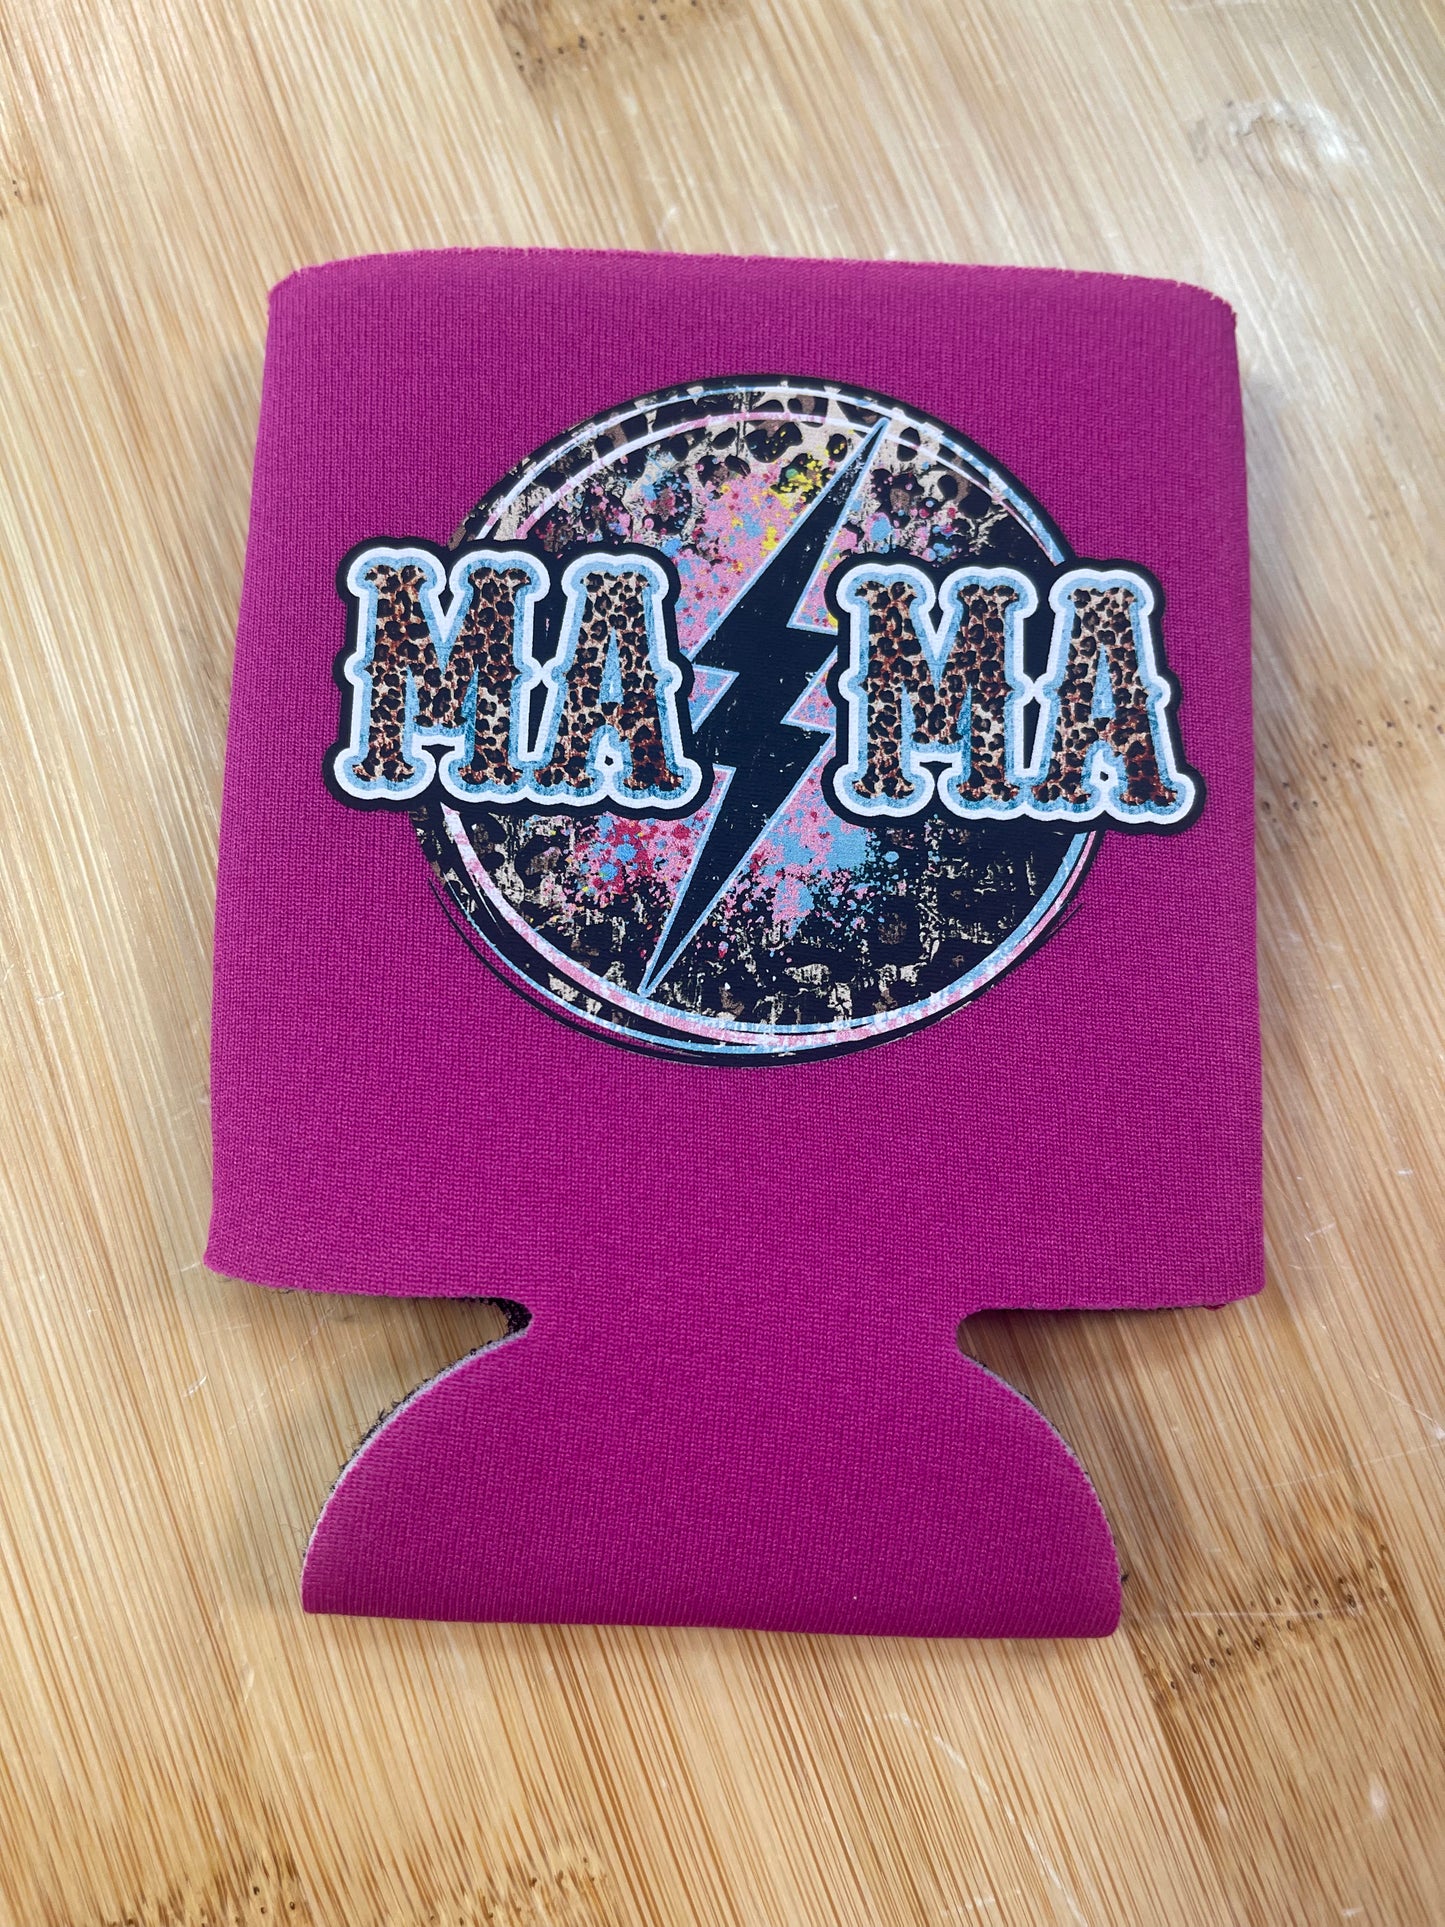 Pre-Made Coozie with Design